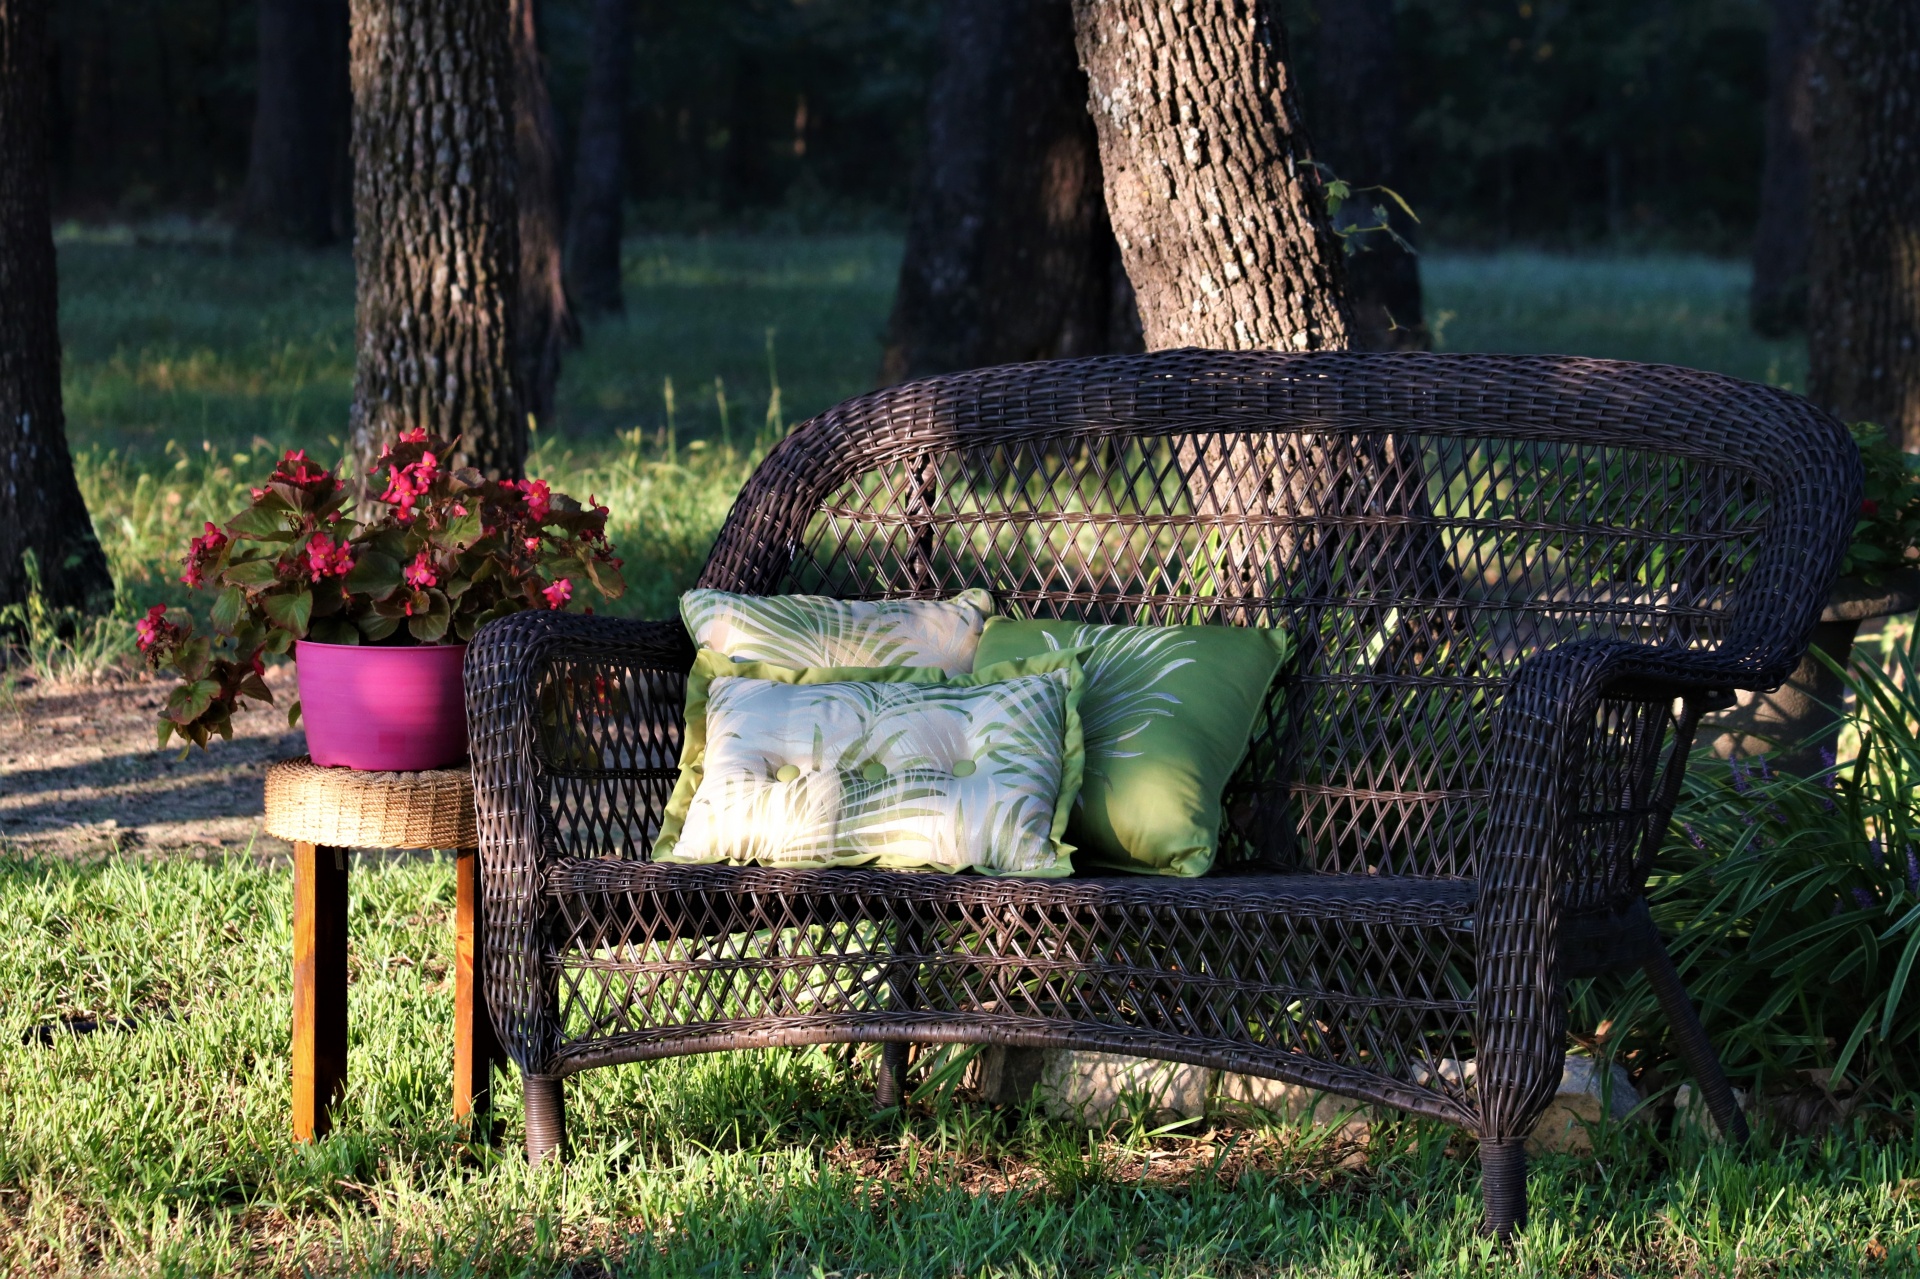 Wicker Chair And Flowers Outdoors